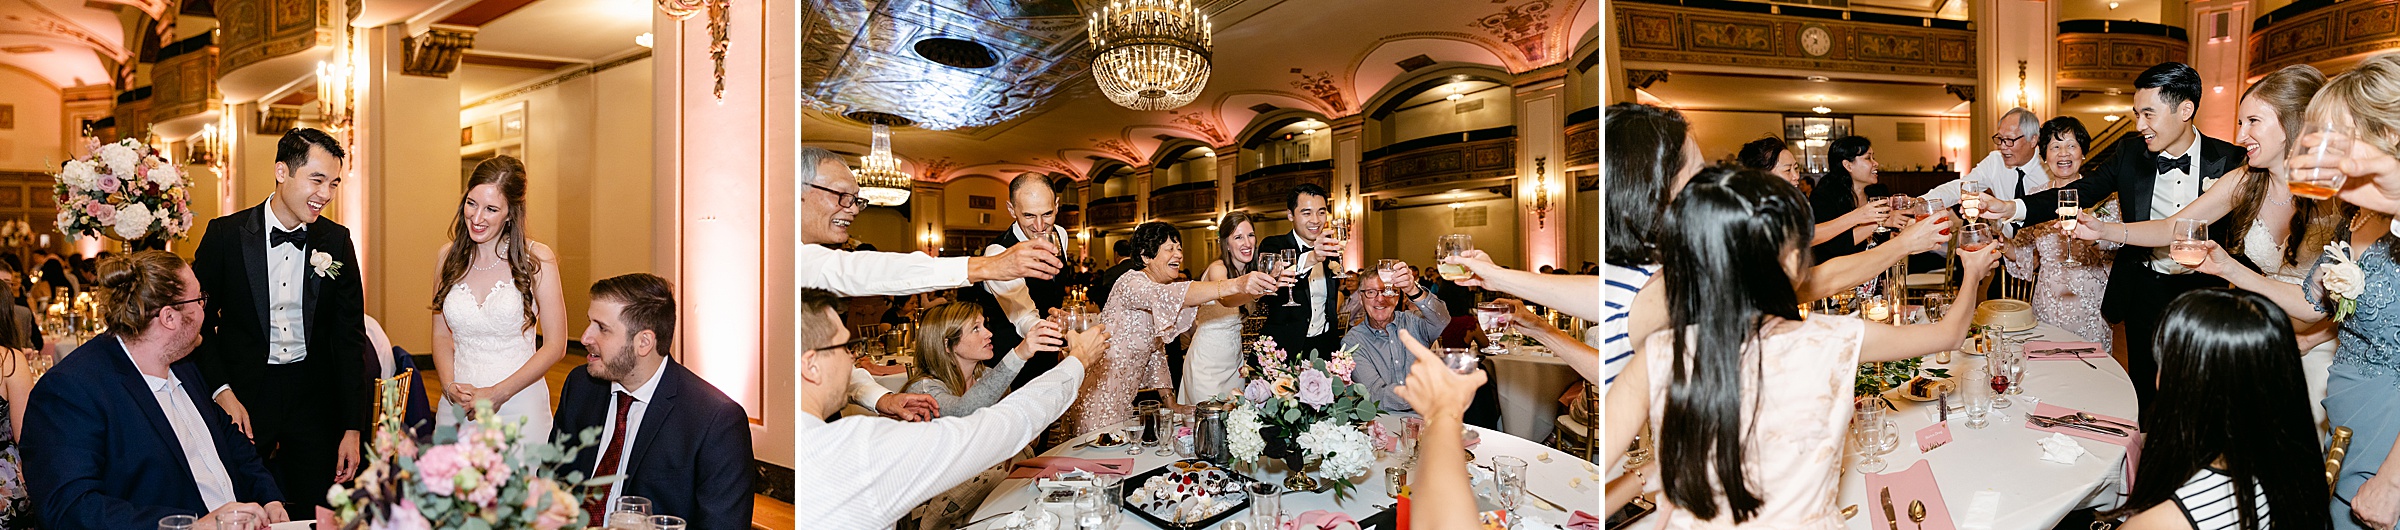 Toasting with guests at the Masonic Temple in Detroit by Michele Maloney Photography